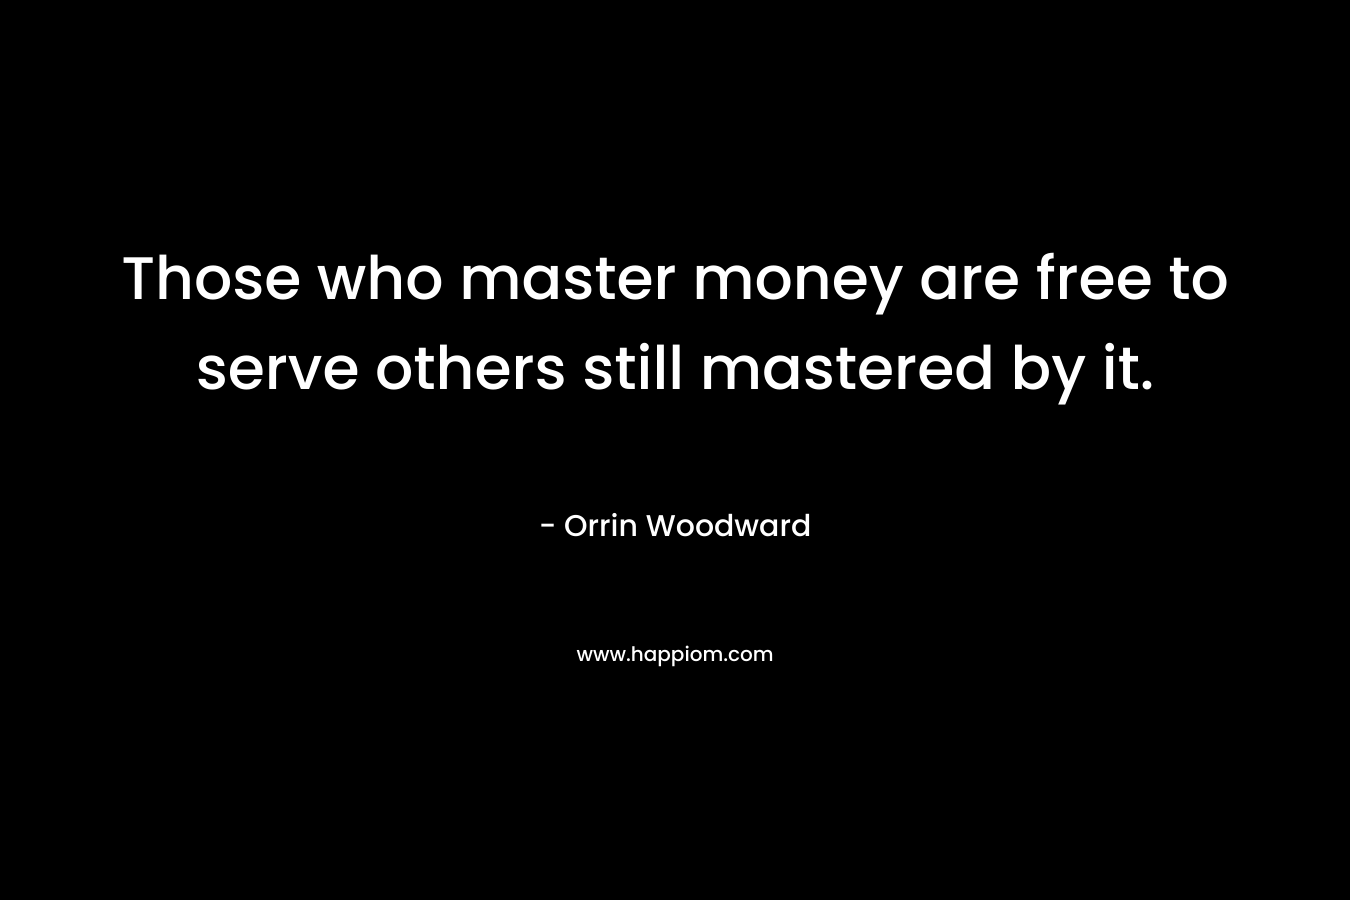 Those who master money are free to serve others still mastered by it.